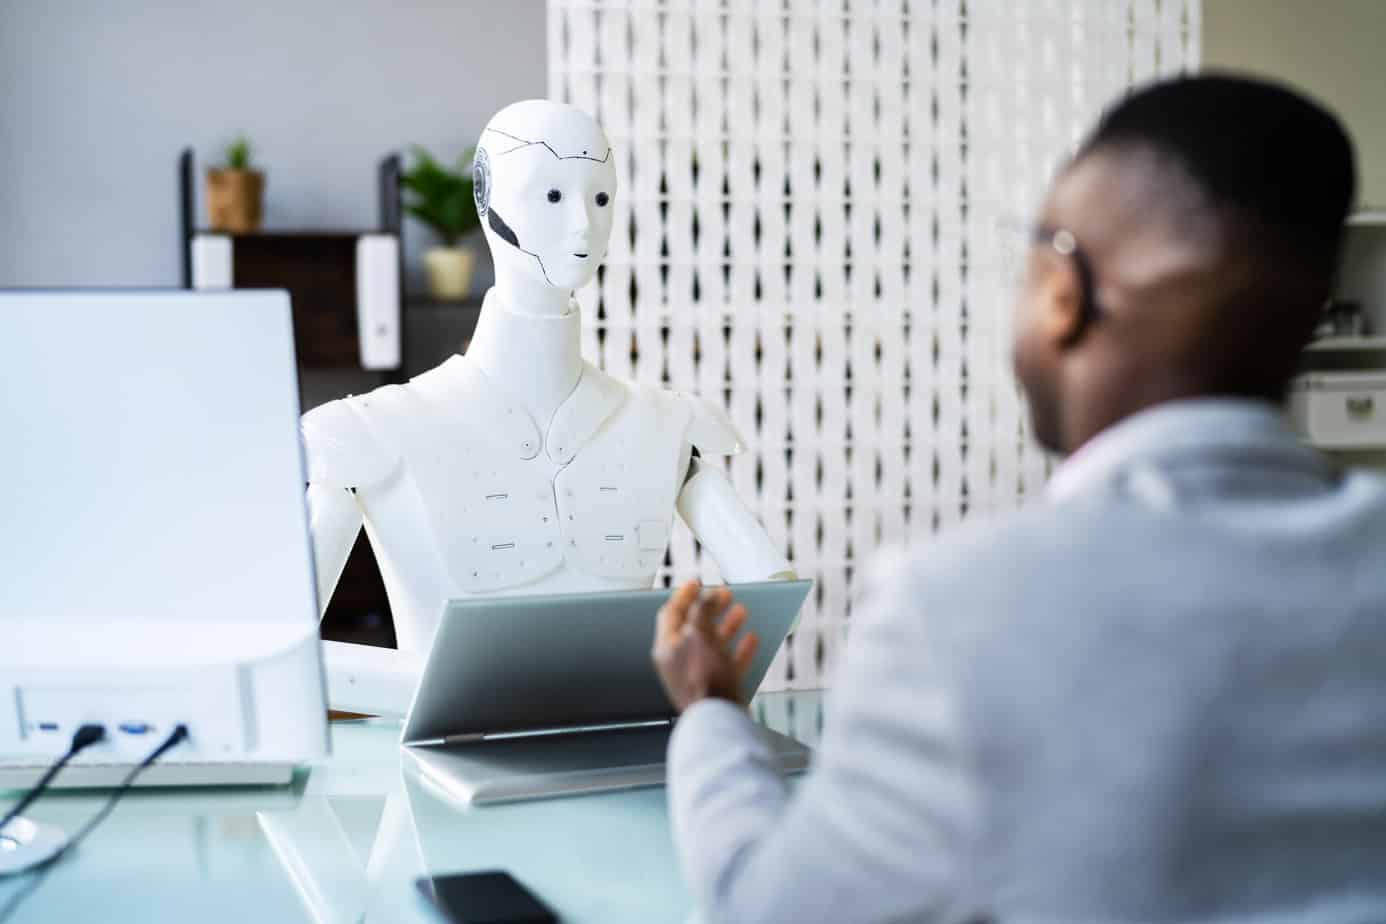 Men At Interview With AI Robot Machine